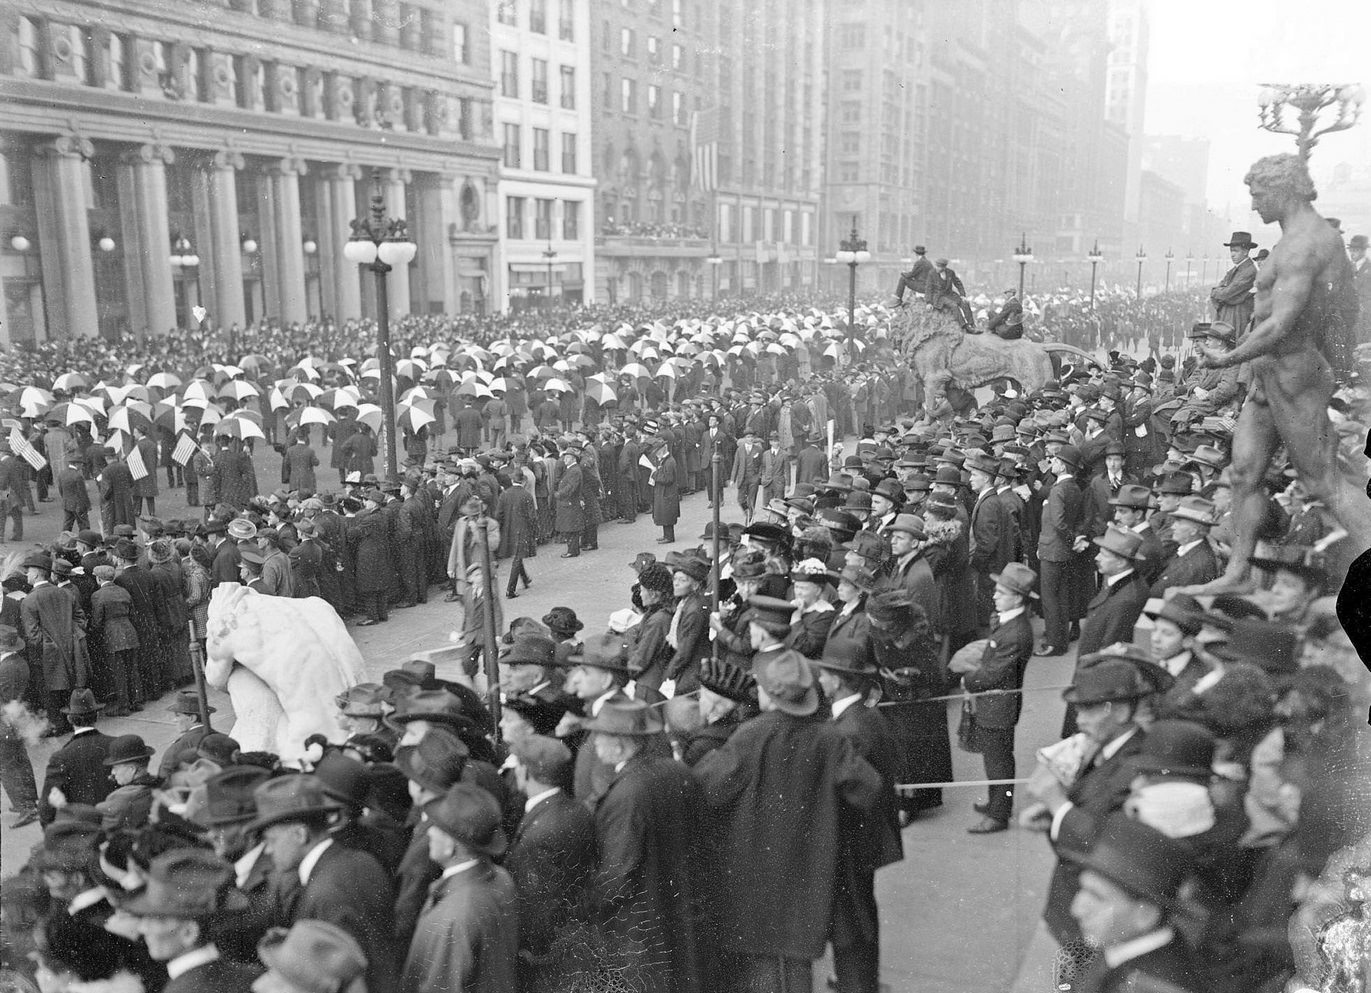 A parade held by the National Republican Party in support of presidential candidate Hughes, Chicago, Illinois, November 4, 1916.